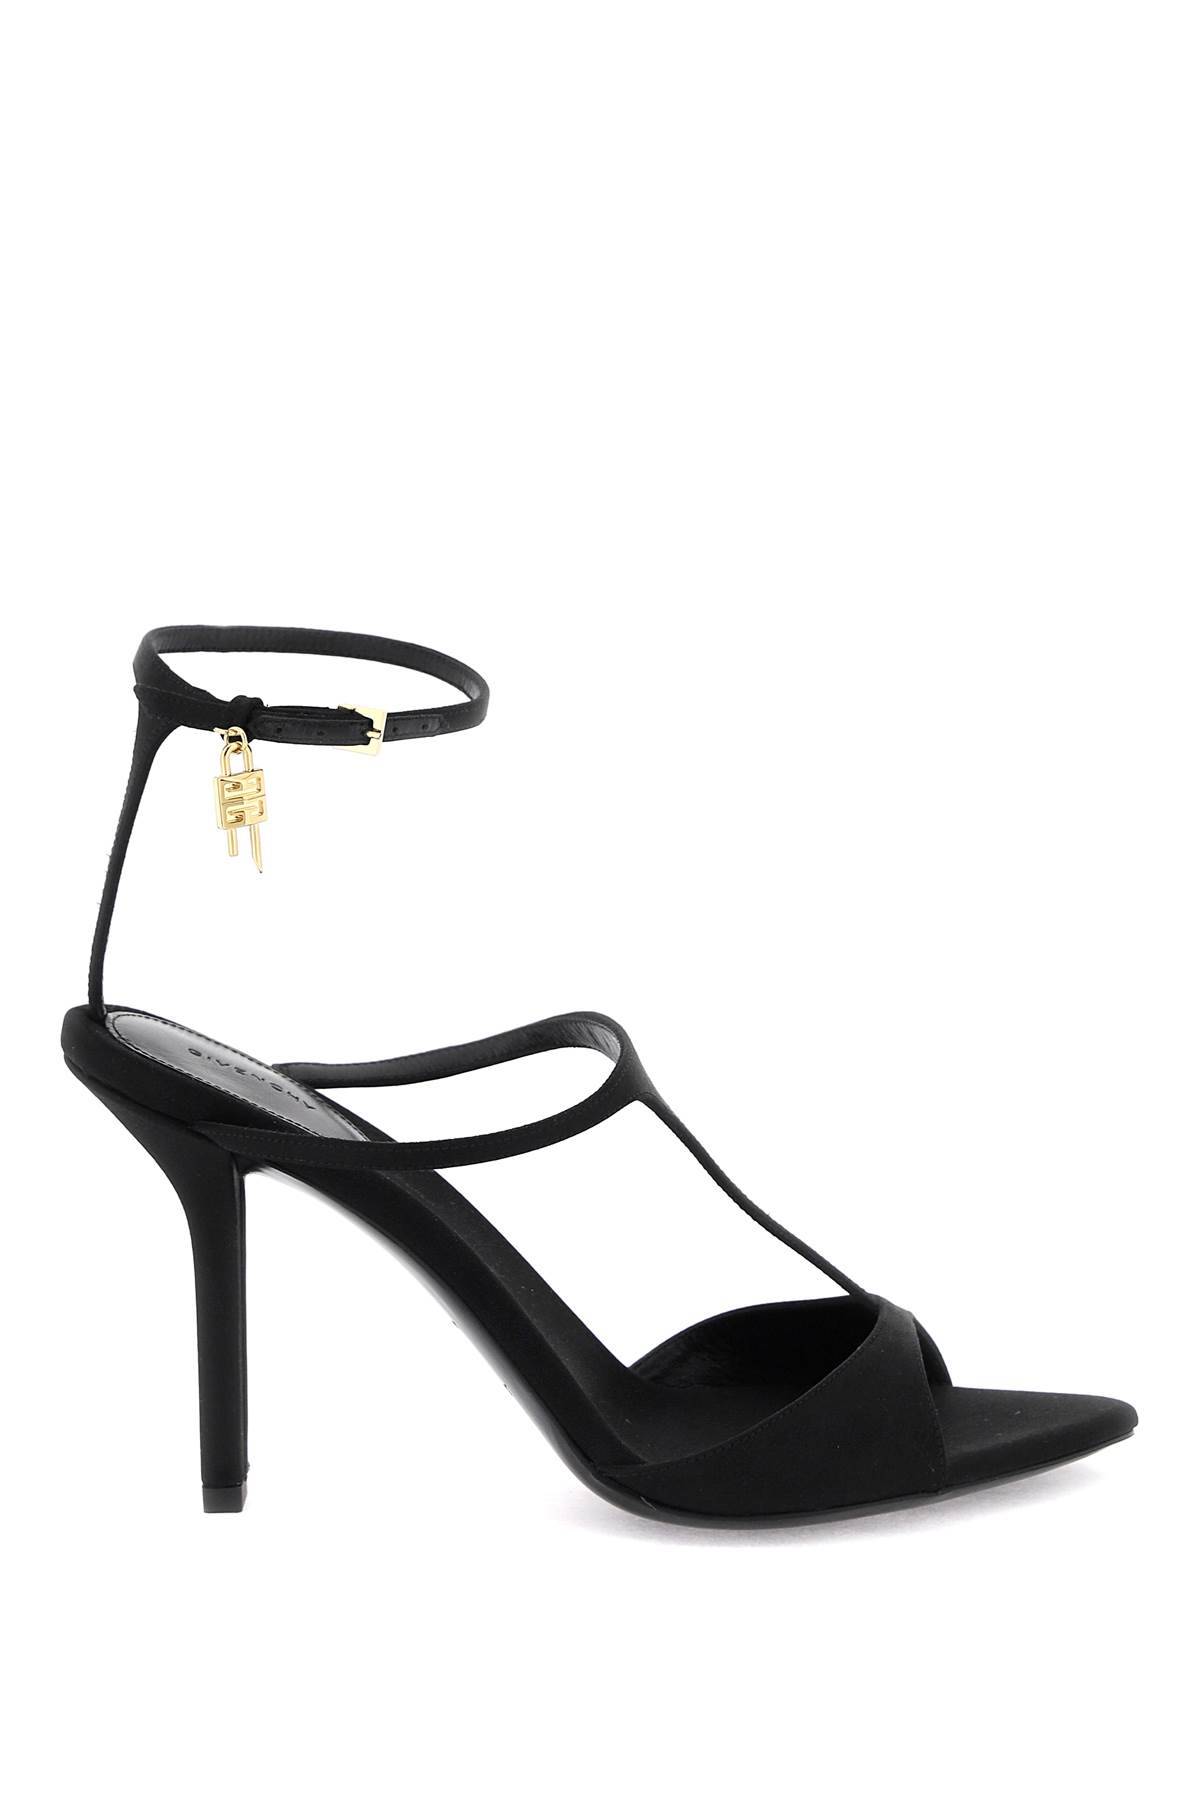 Givenchy GIVENCHY satin sandals with g lock charm